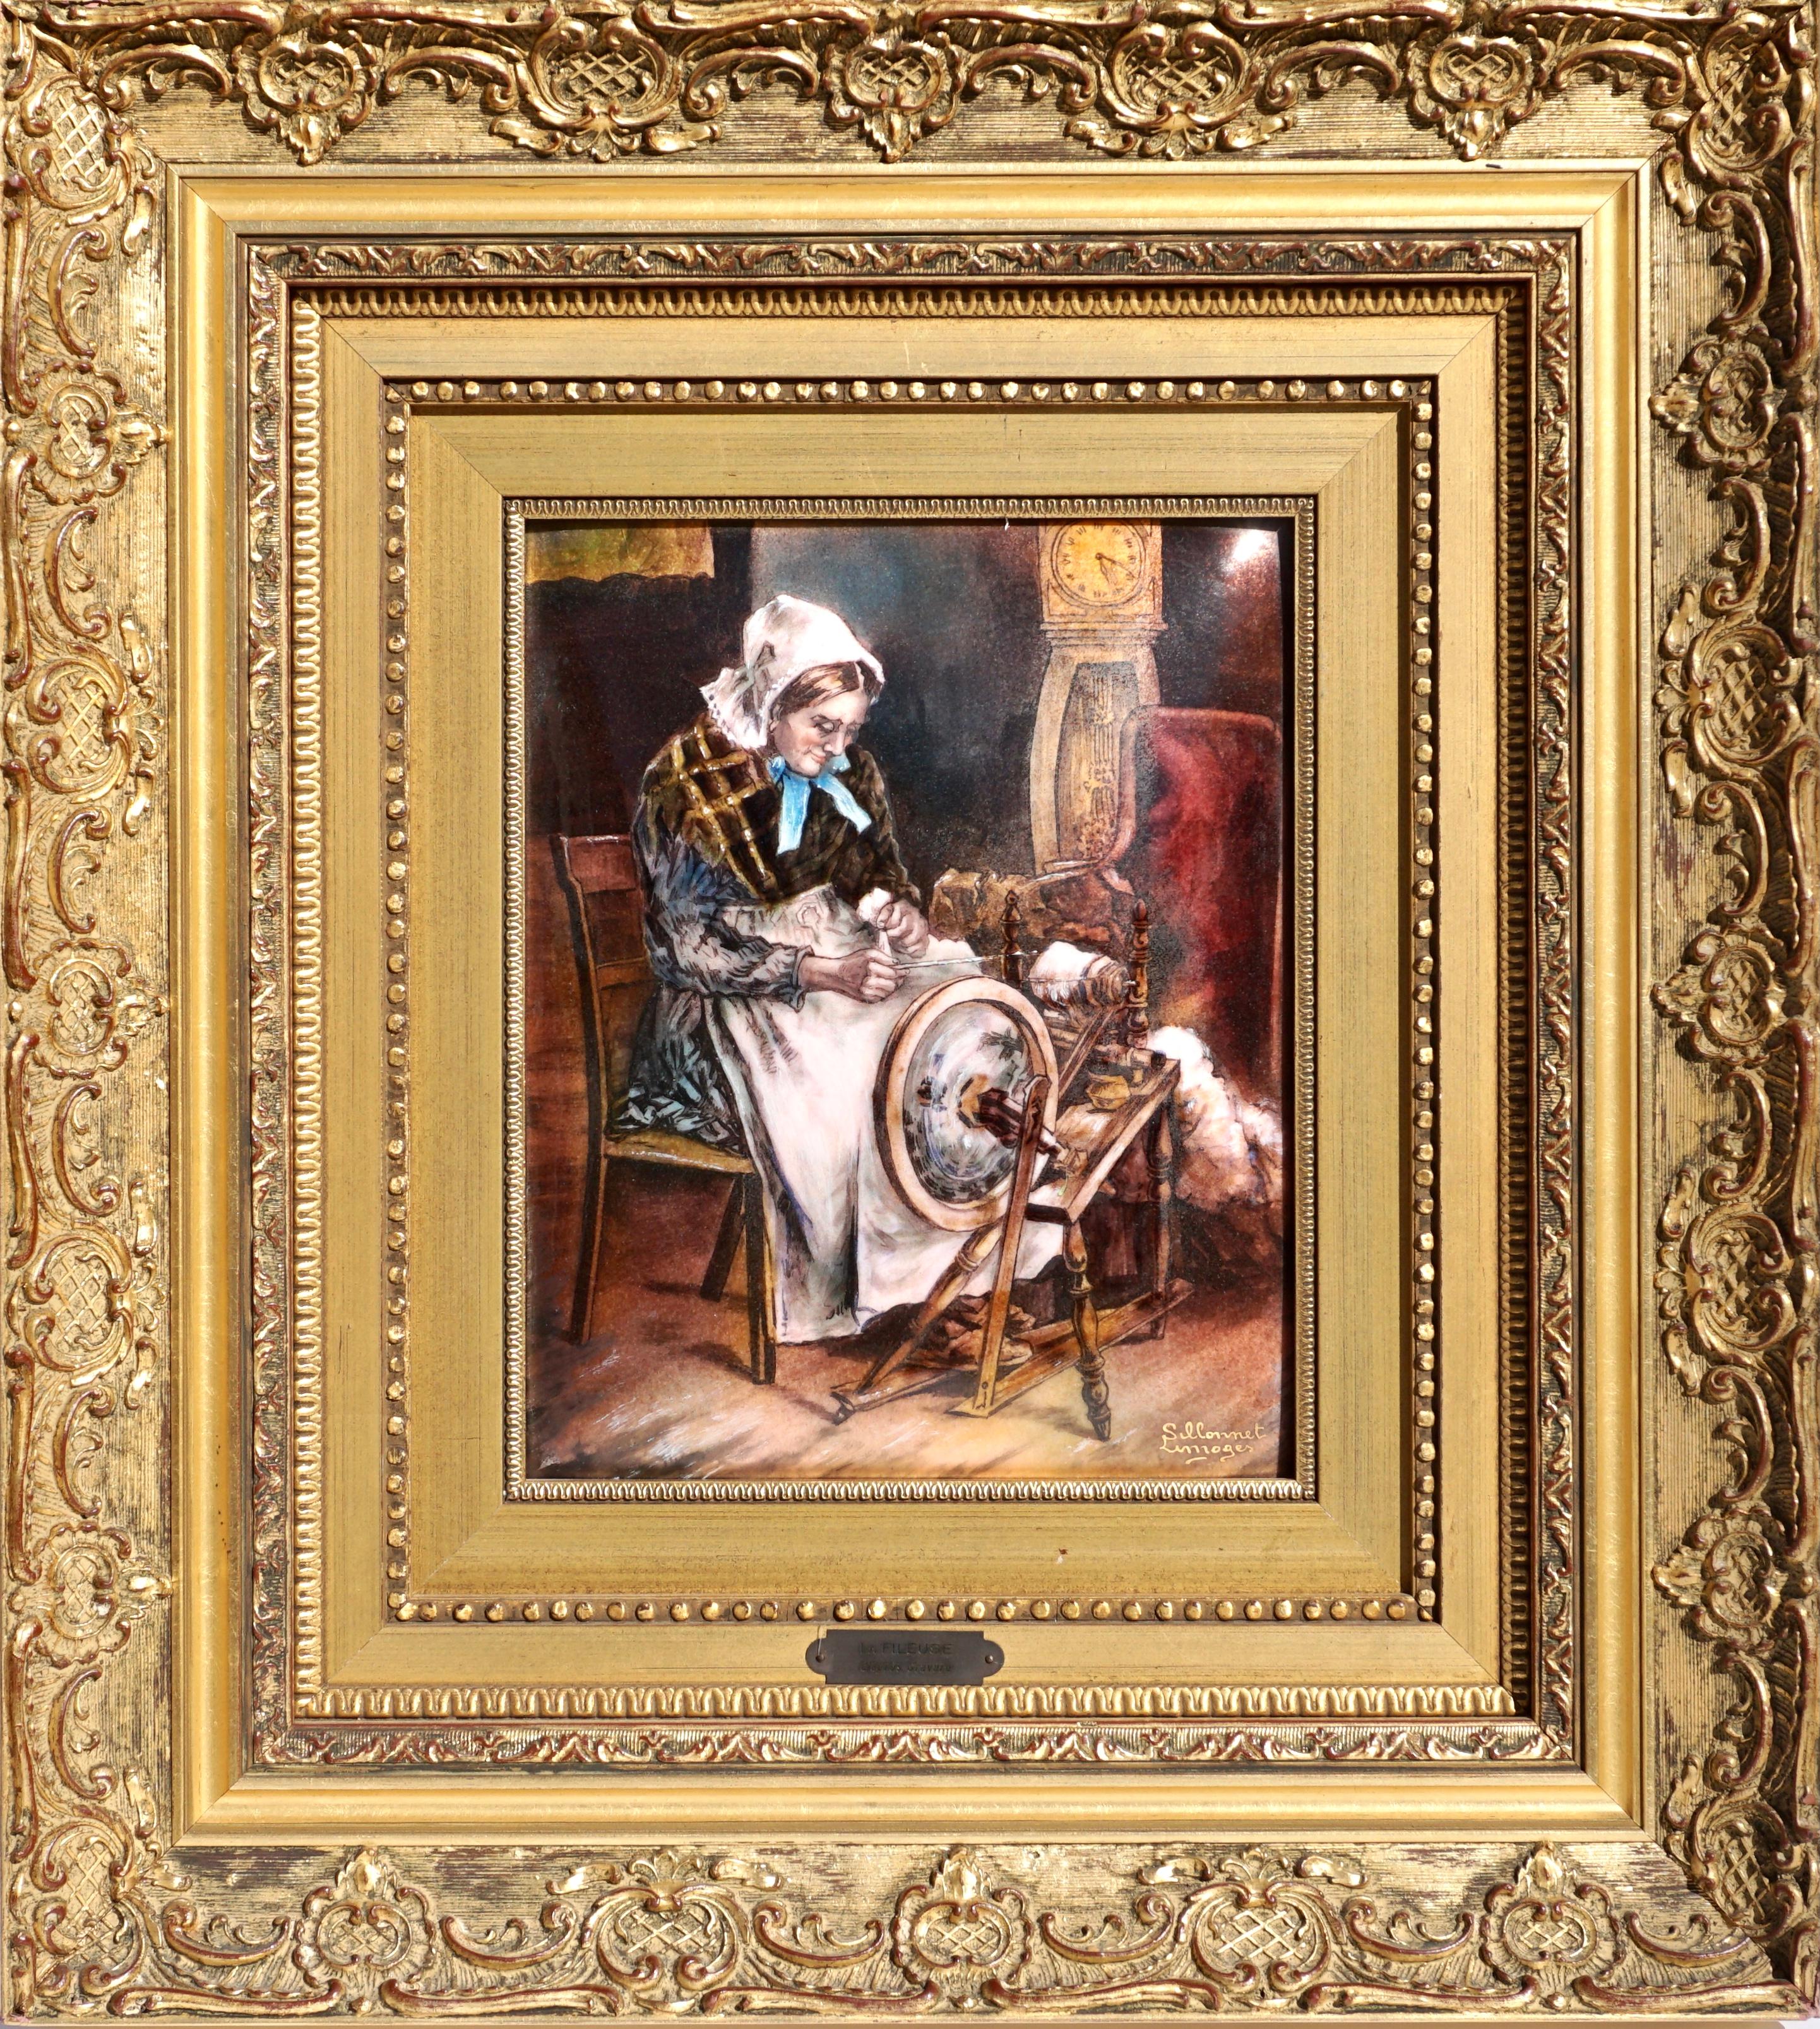 A large enamel on a convened copper plaque. The scene is of a seated elderly woman looming cotton or wool yarn, Circa 1900. Hand painted then baked on in a oven by Limoges.

Signed “Limoges Sillonnet”

Plaque dimensions: 11 inches x 8.75